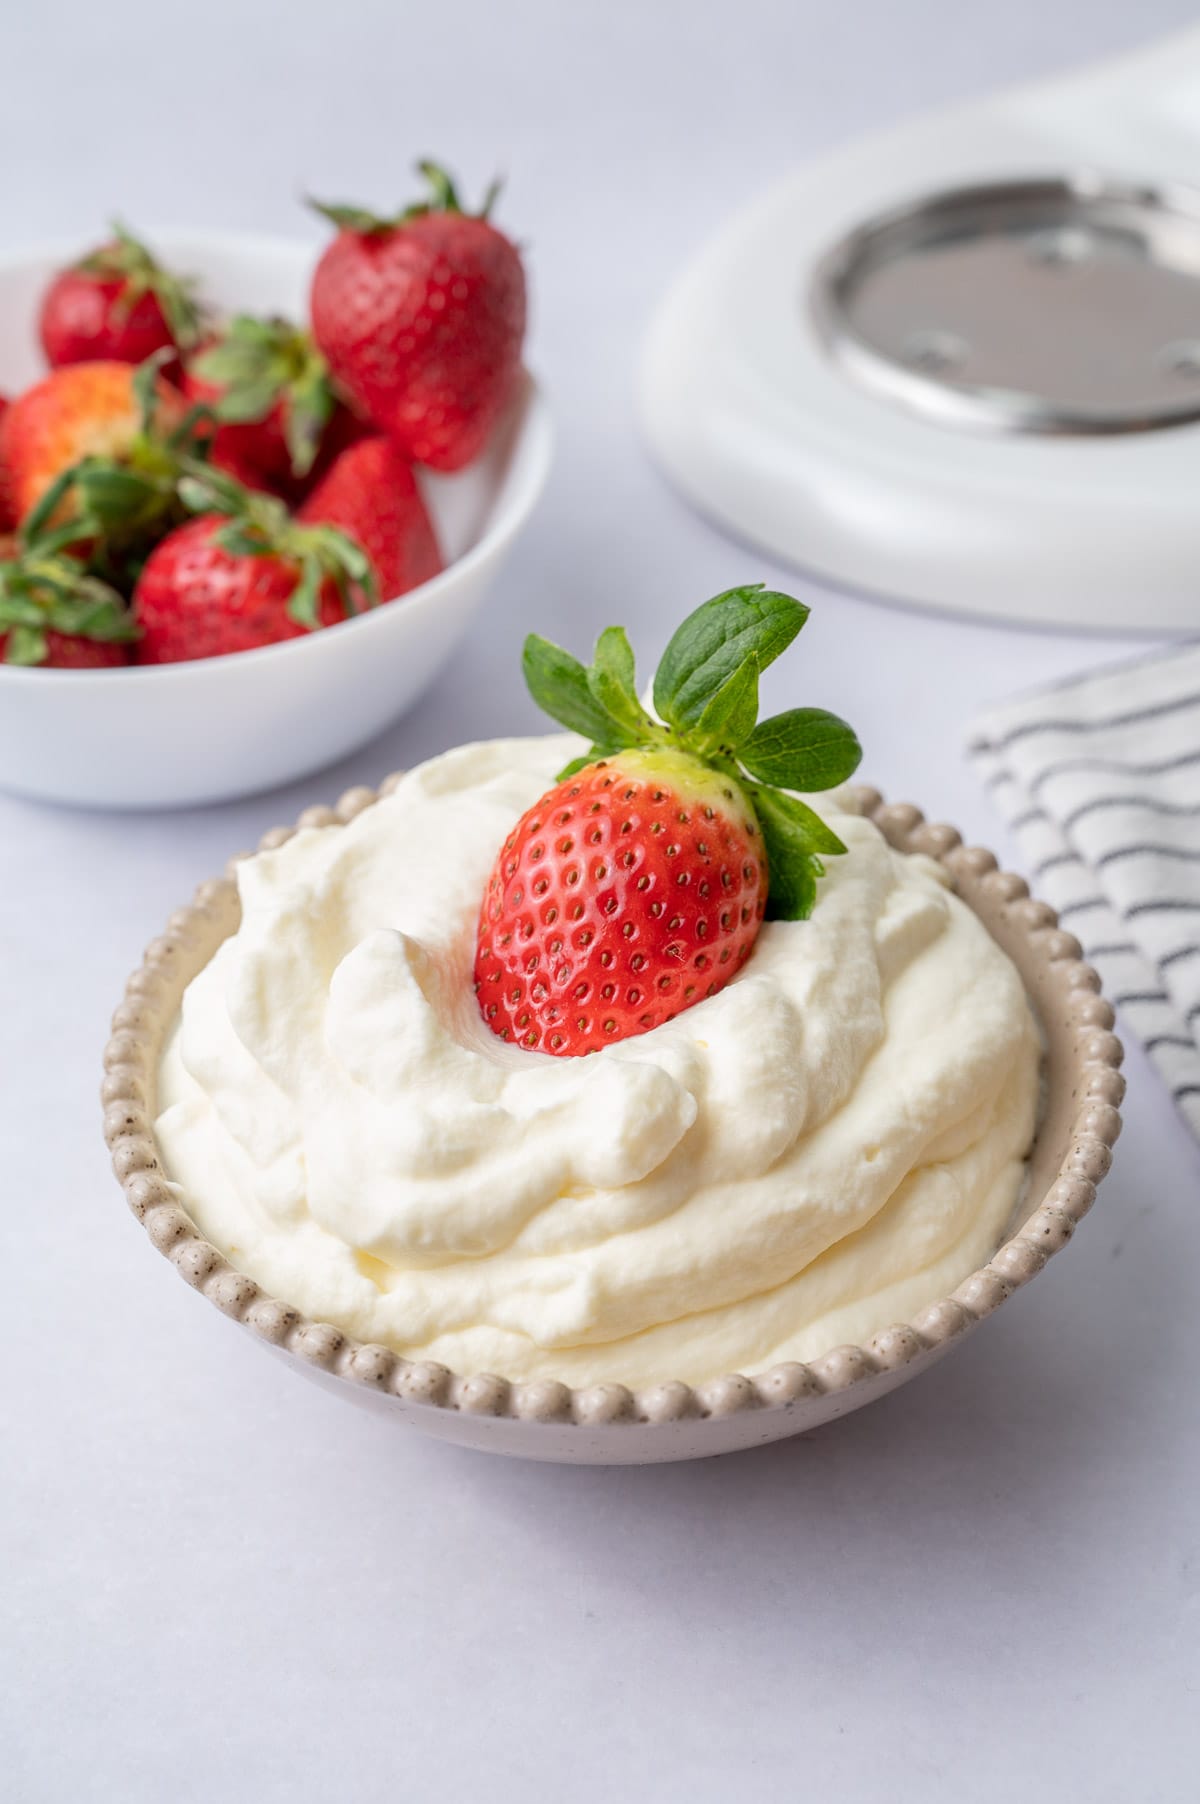 Whipped cream in a beige bowl with a strawberry on top.